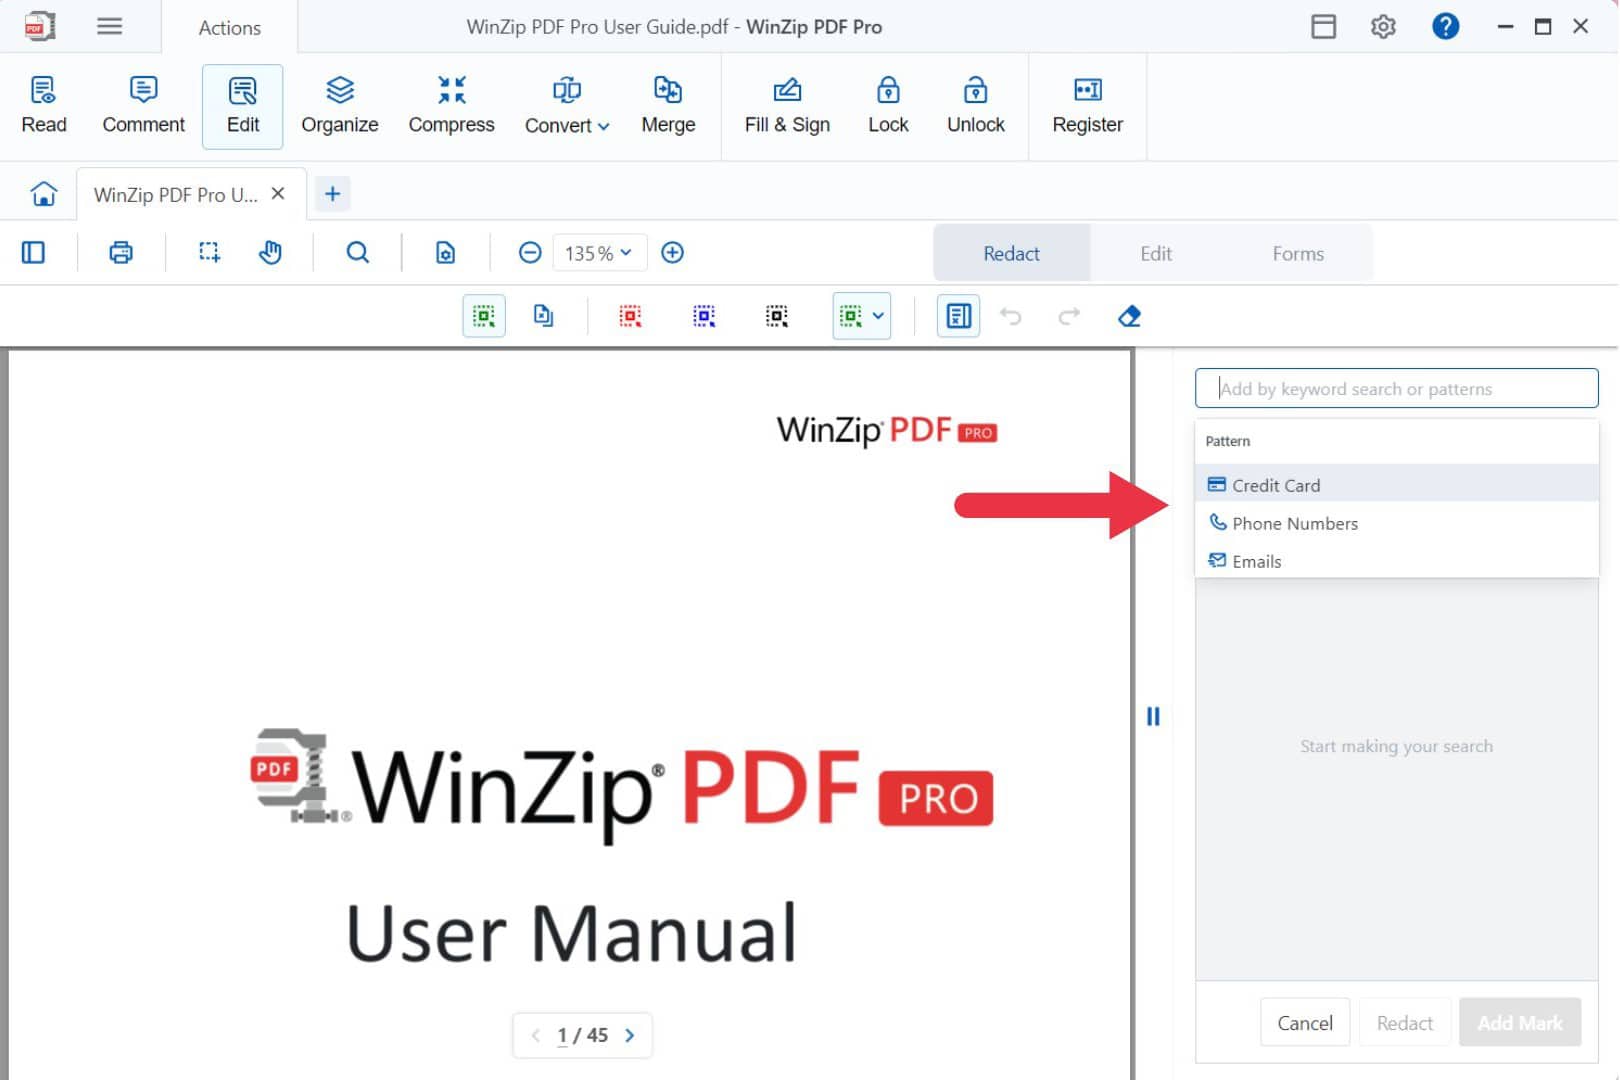 search_and_redact_credit_card_winzip_pdf_pro